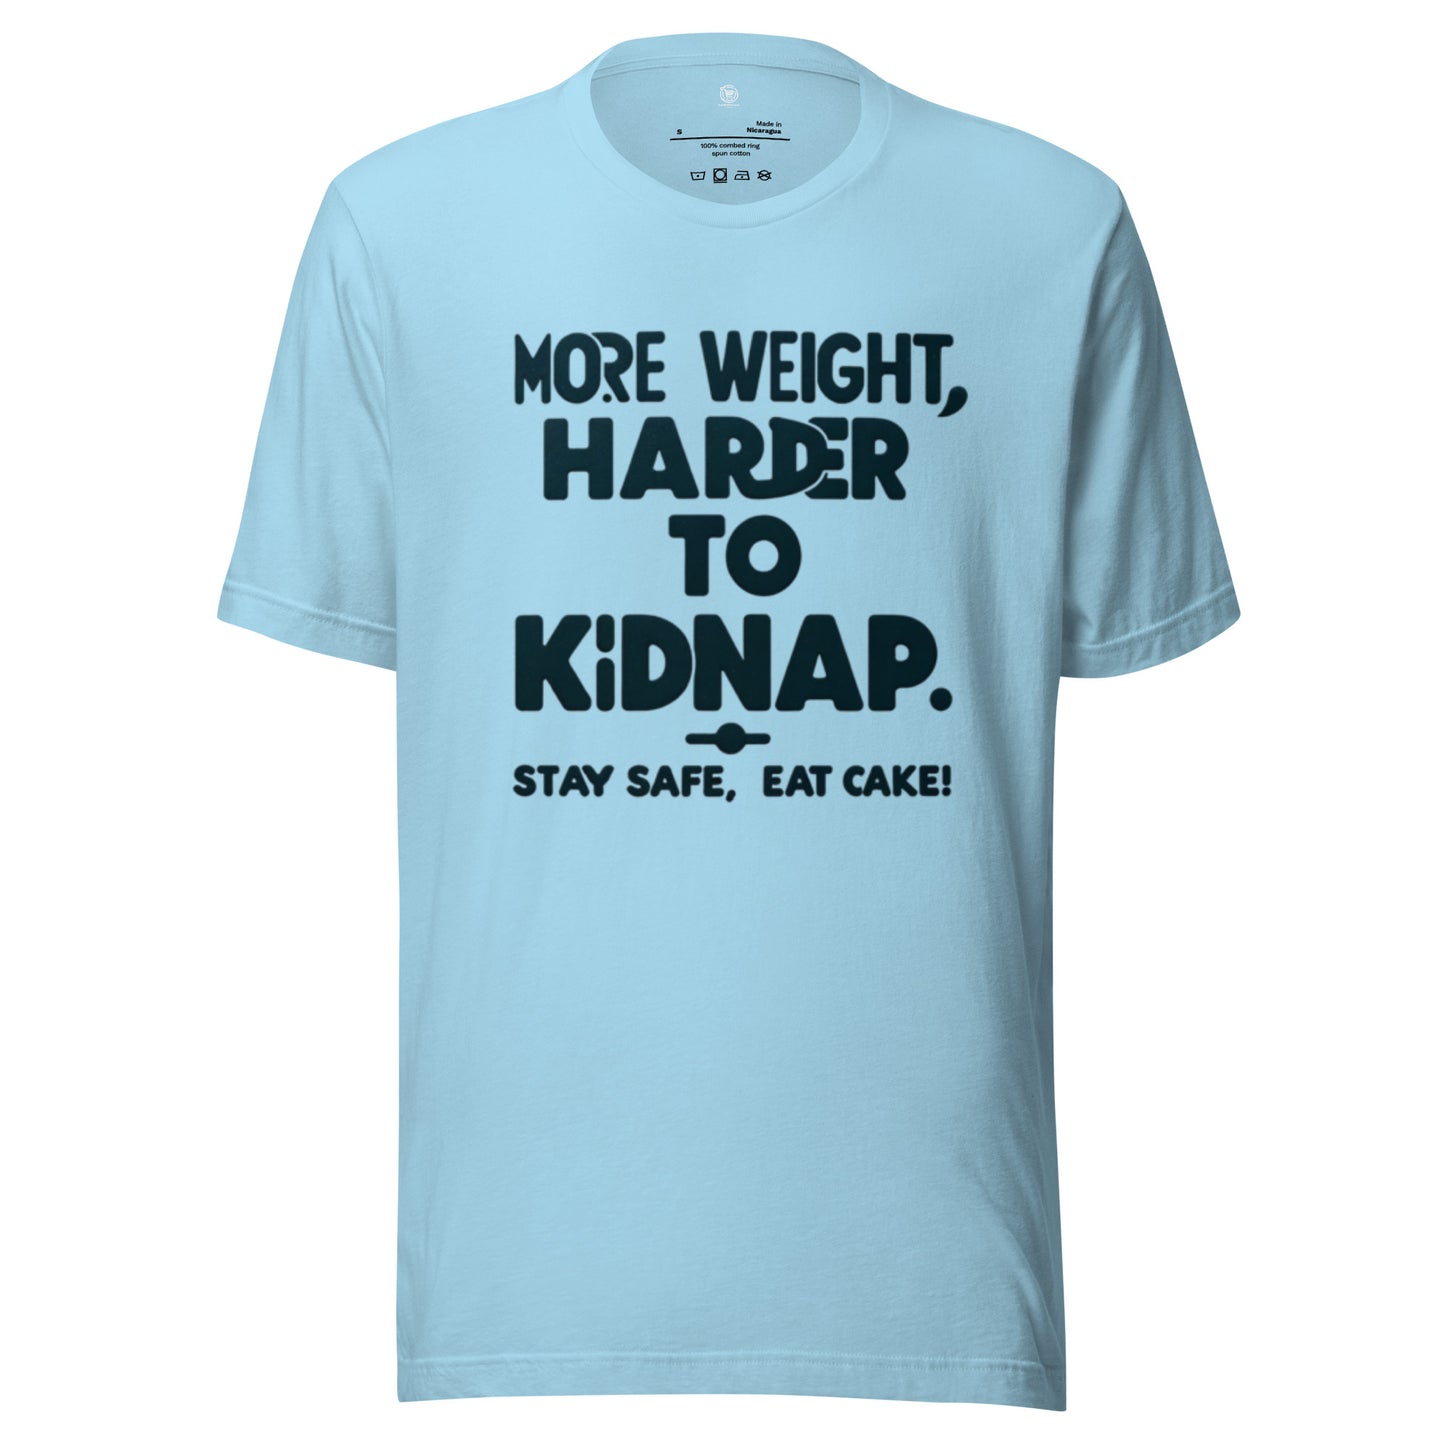 More weight, harder to kidnap. Stay safe, eat cake! - Unisex t-shirt